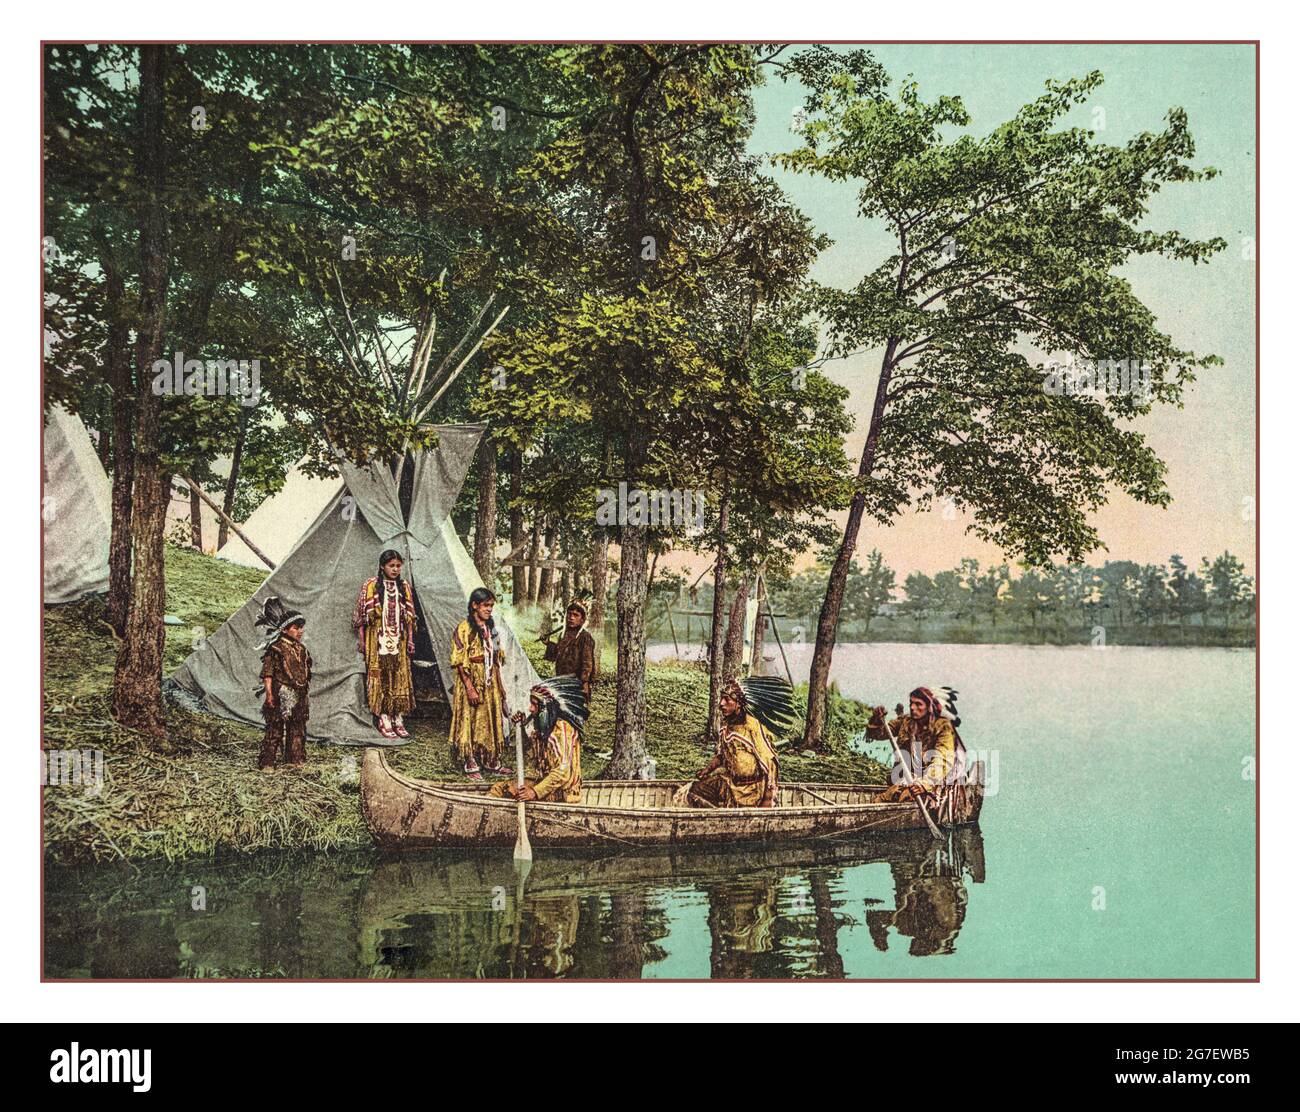 1900s 'The return of the hunters Hiawatha “ Detroit Photographic Co., c1904.  Photochrom, color. The Return Of The Hunters MInnesota, 1904 photochrom of the Native American Ojibwa hunters returning to their camp in their birchbark canoe. Stock Photo